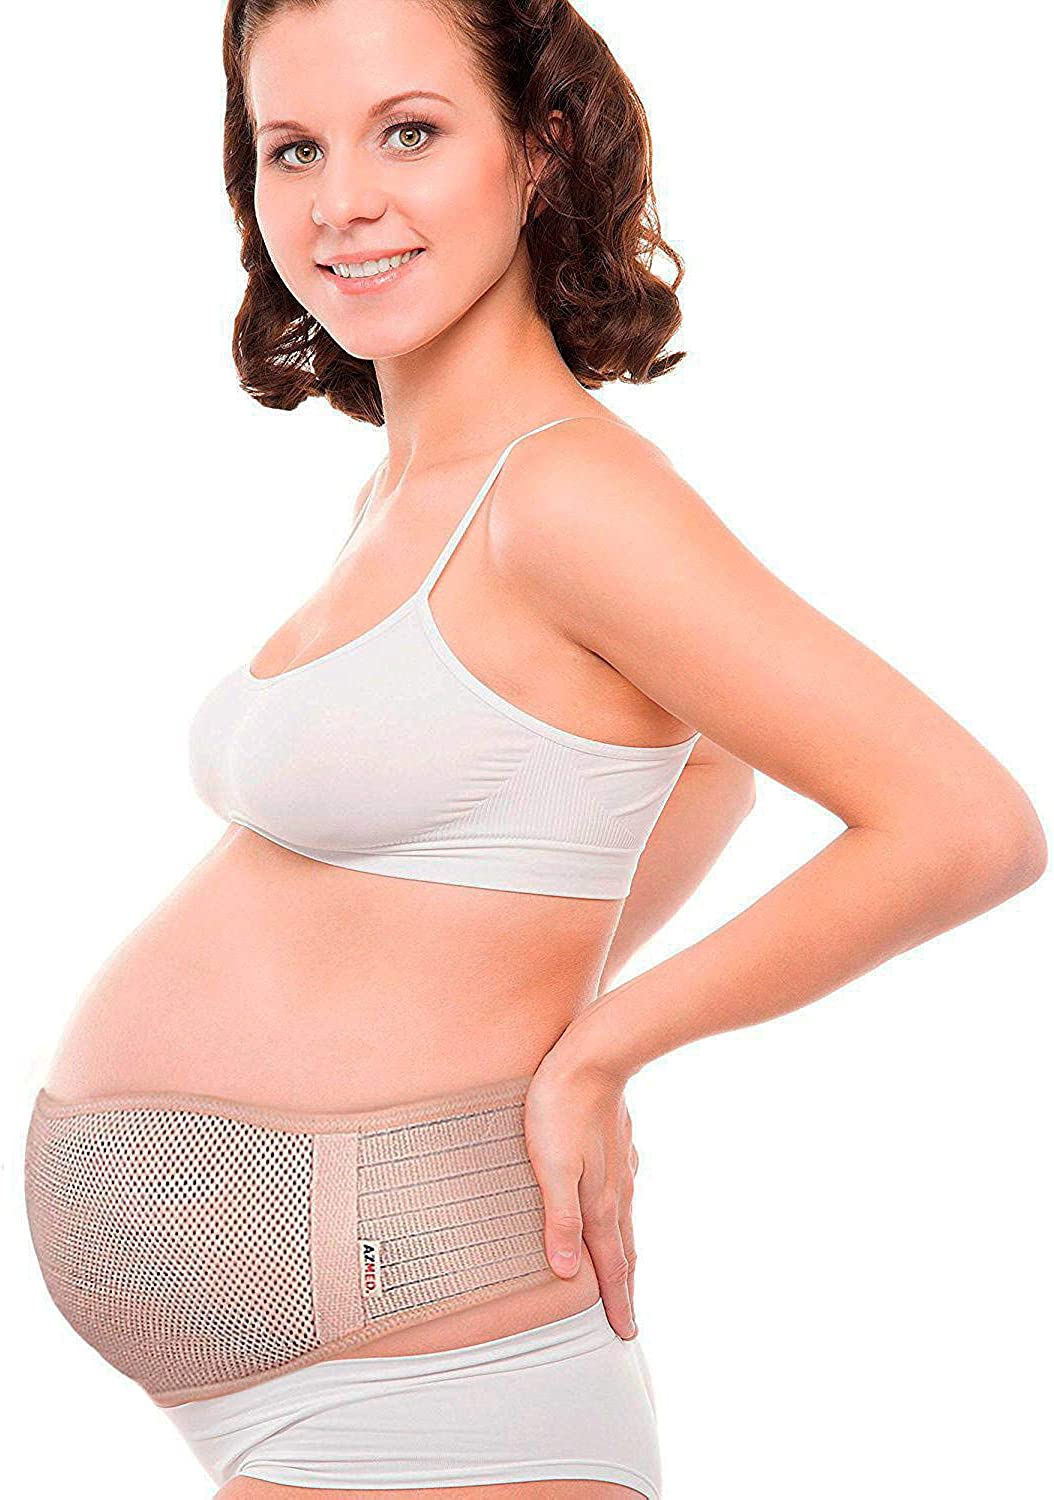 Review of AZMED Maternity Belt, Breathable Pregnancy Back Support